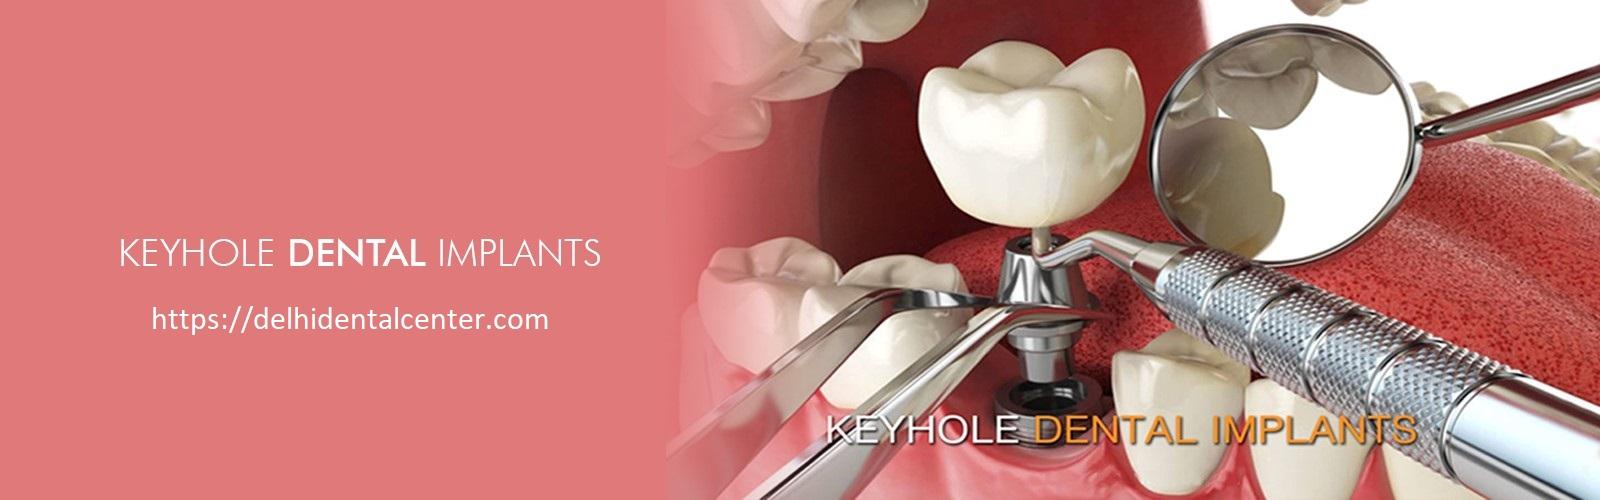 Benefits and Advantages of Dental Implants